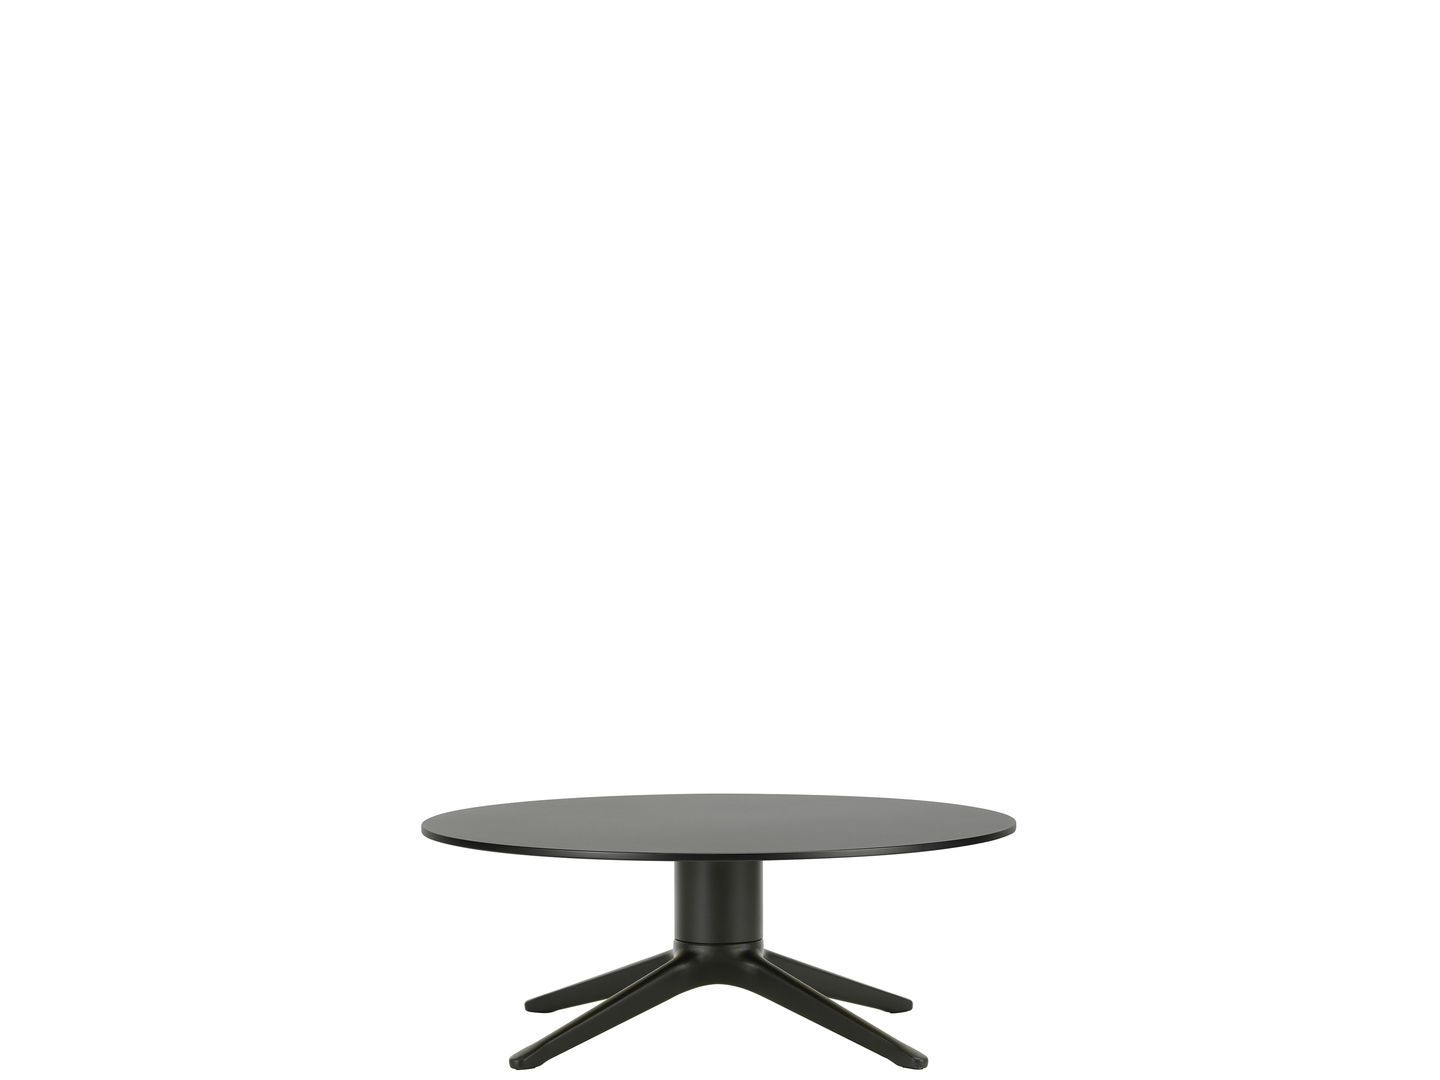 Abalon Table | One52 Furniture 